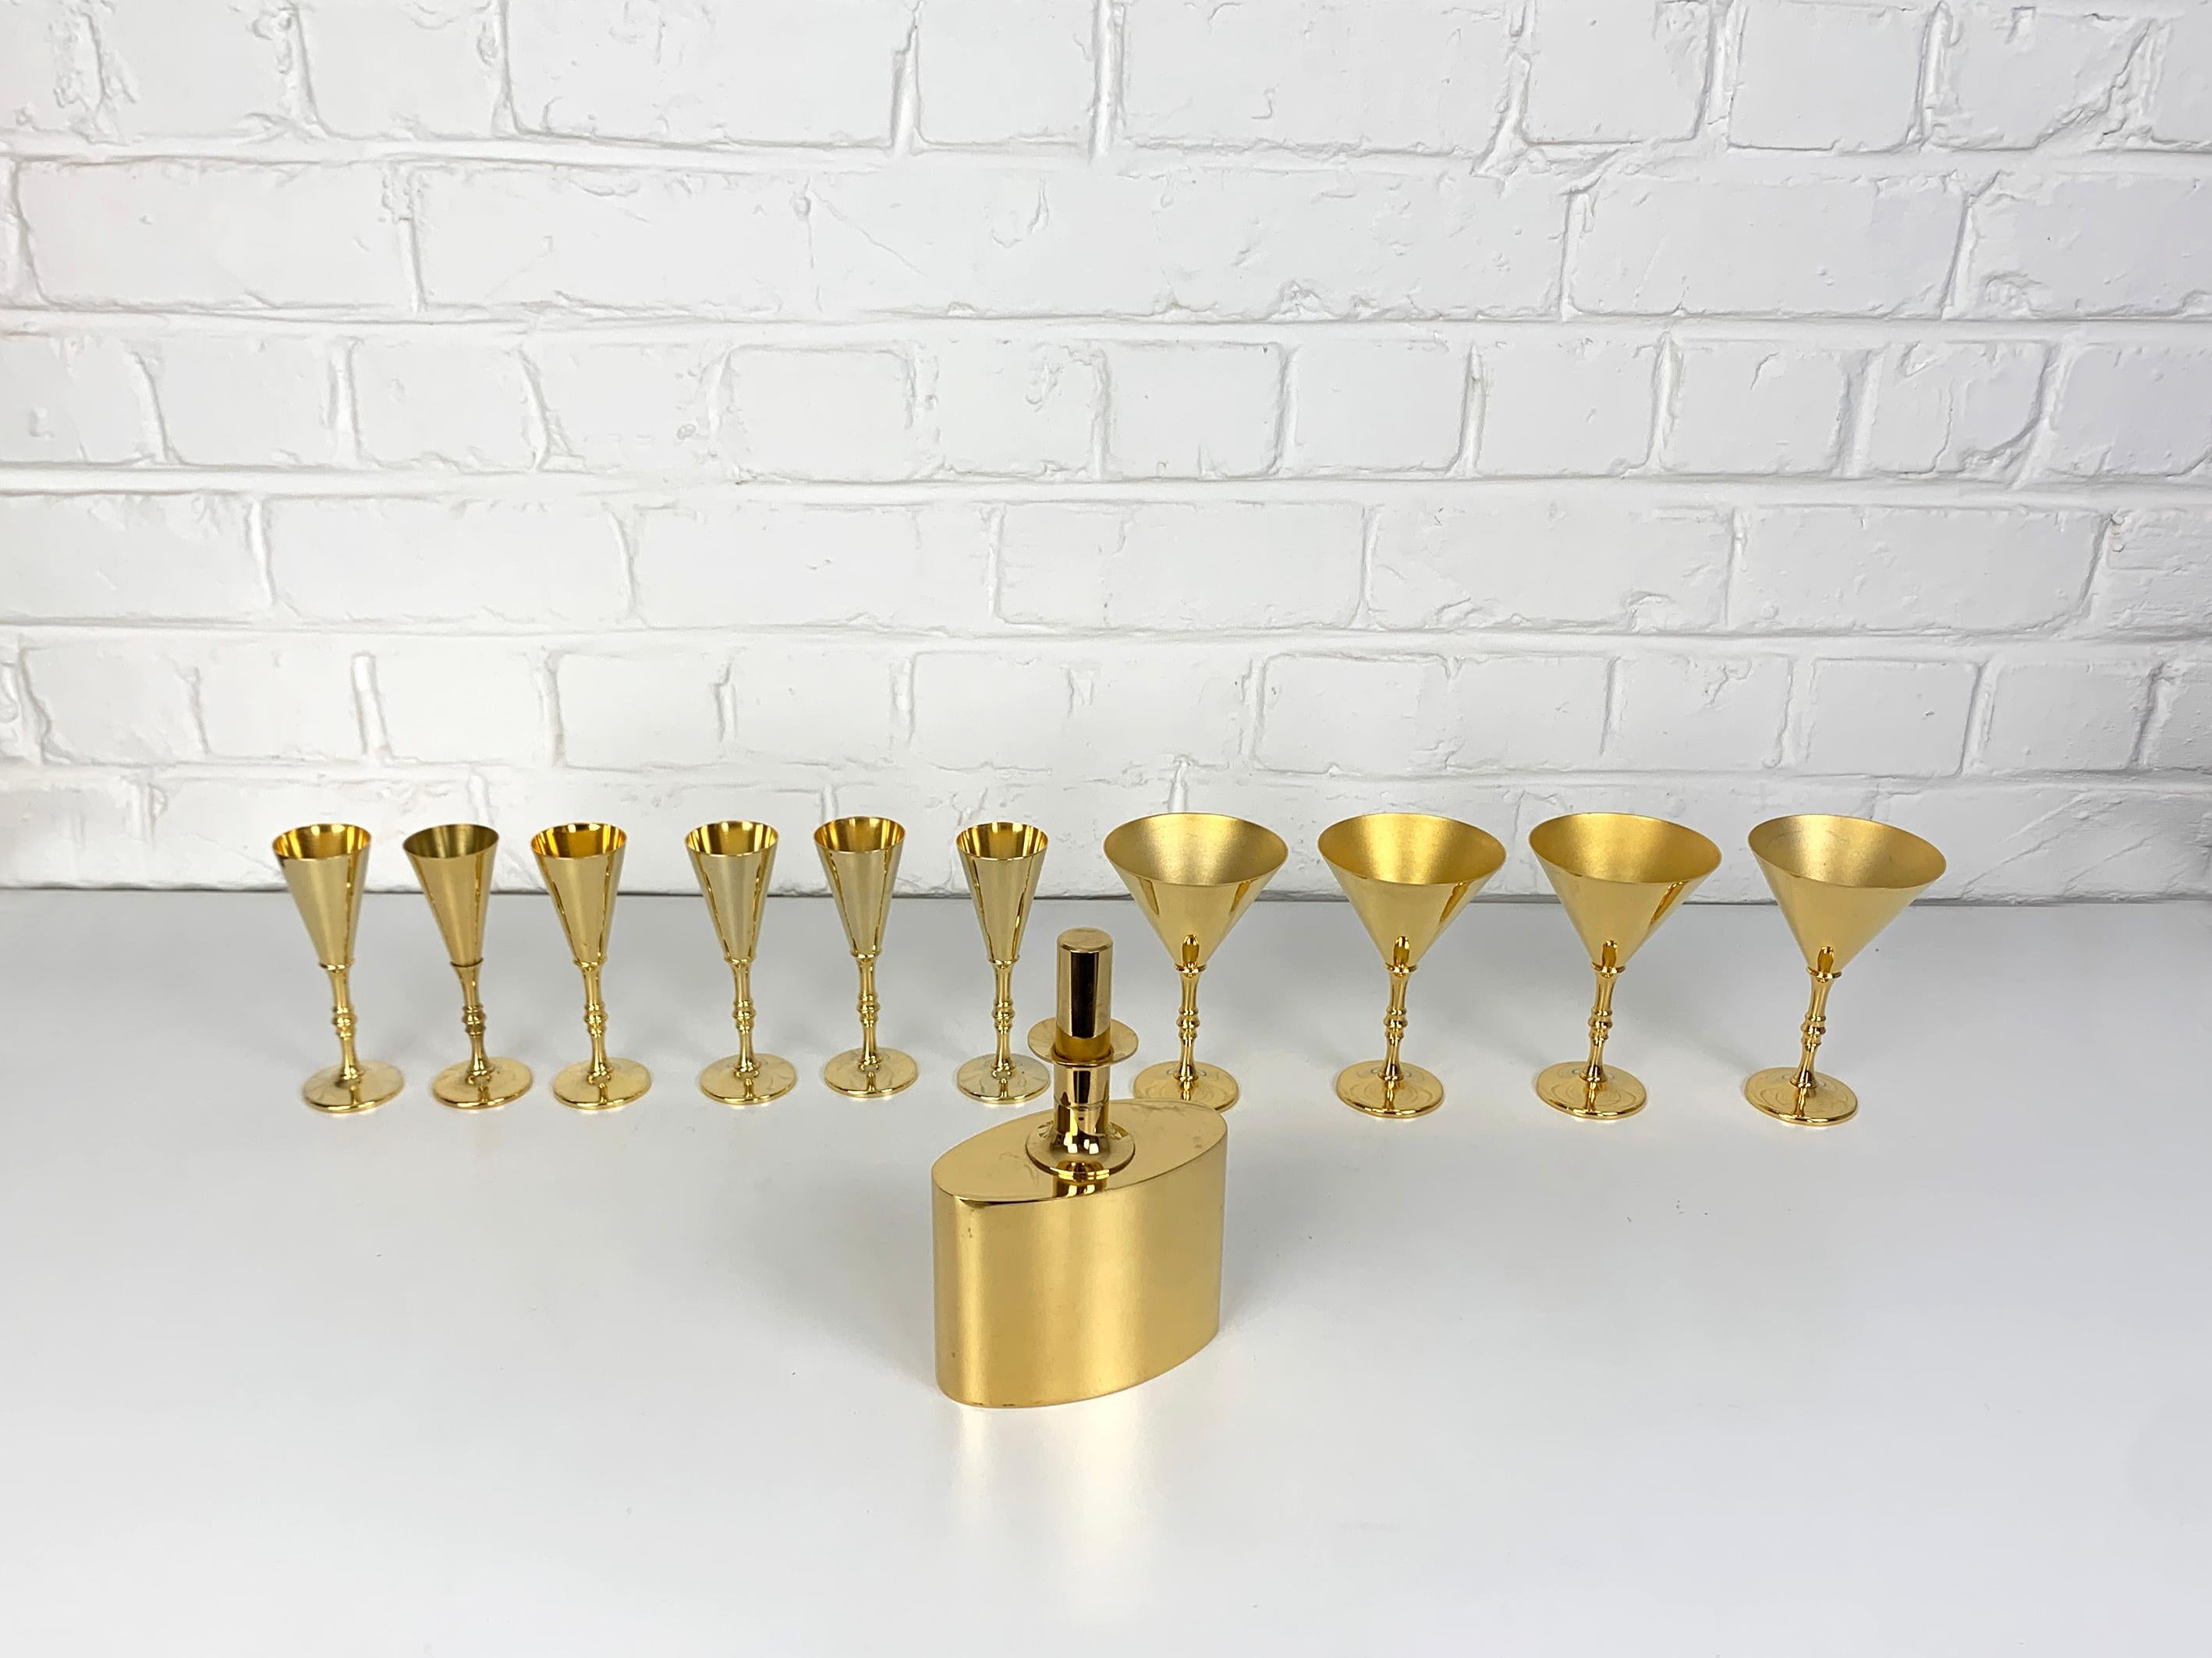 Elegant Decanter and 10 Shot Glasses made from brass. Gold plated, 23 Carat.

Designed by Pierre Forssell and manufactured in Sweden by Skultuna. The company was founded by King Carl IX of Sweden in 1607. Pierre Forsell worked between 1955 and 1986